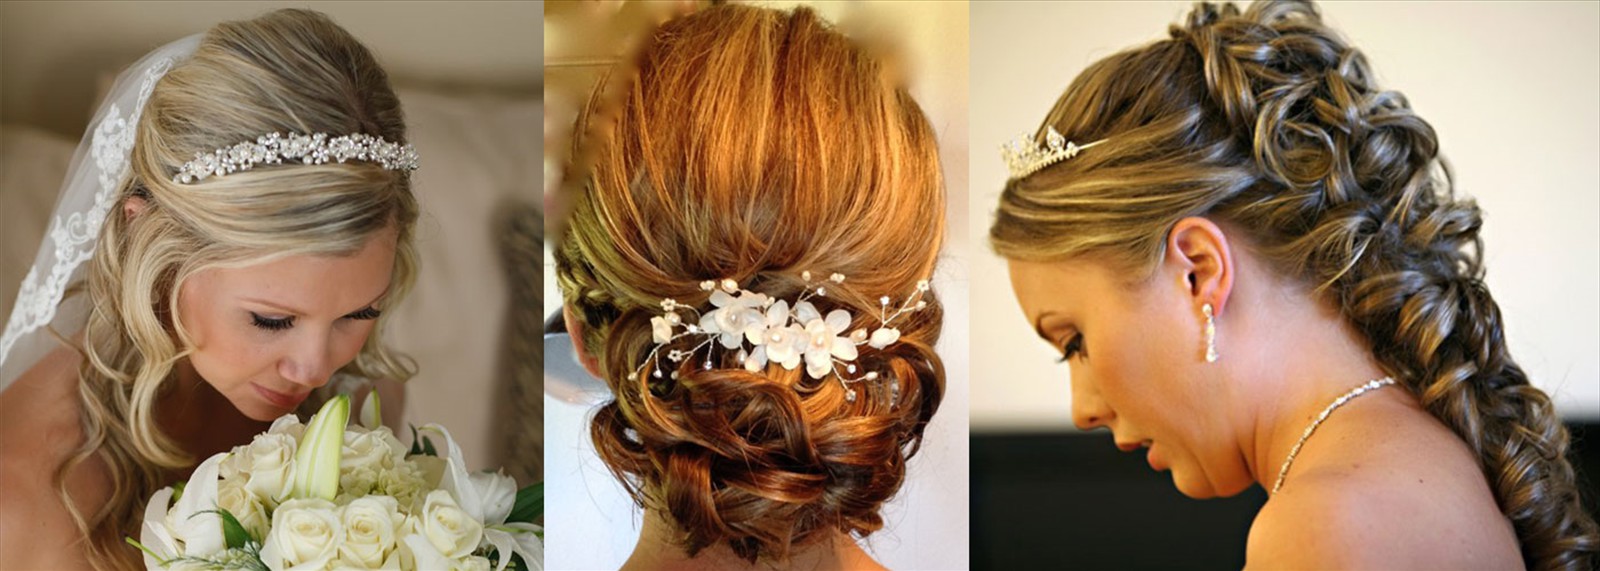 Brides Hair Styling